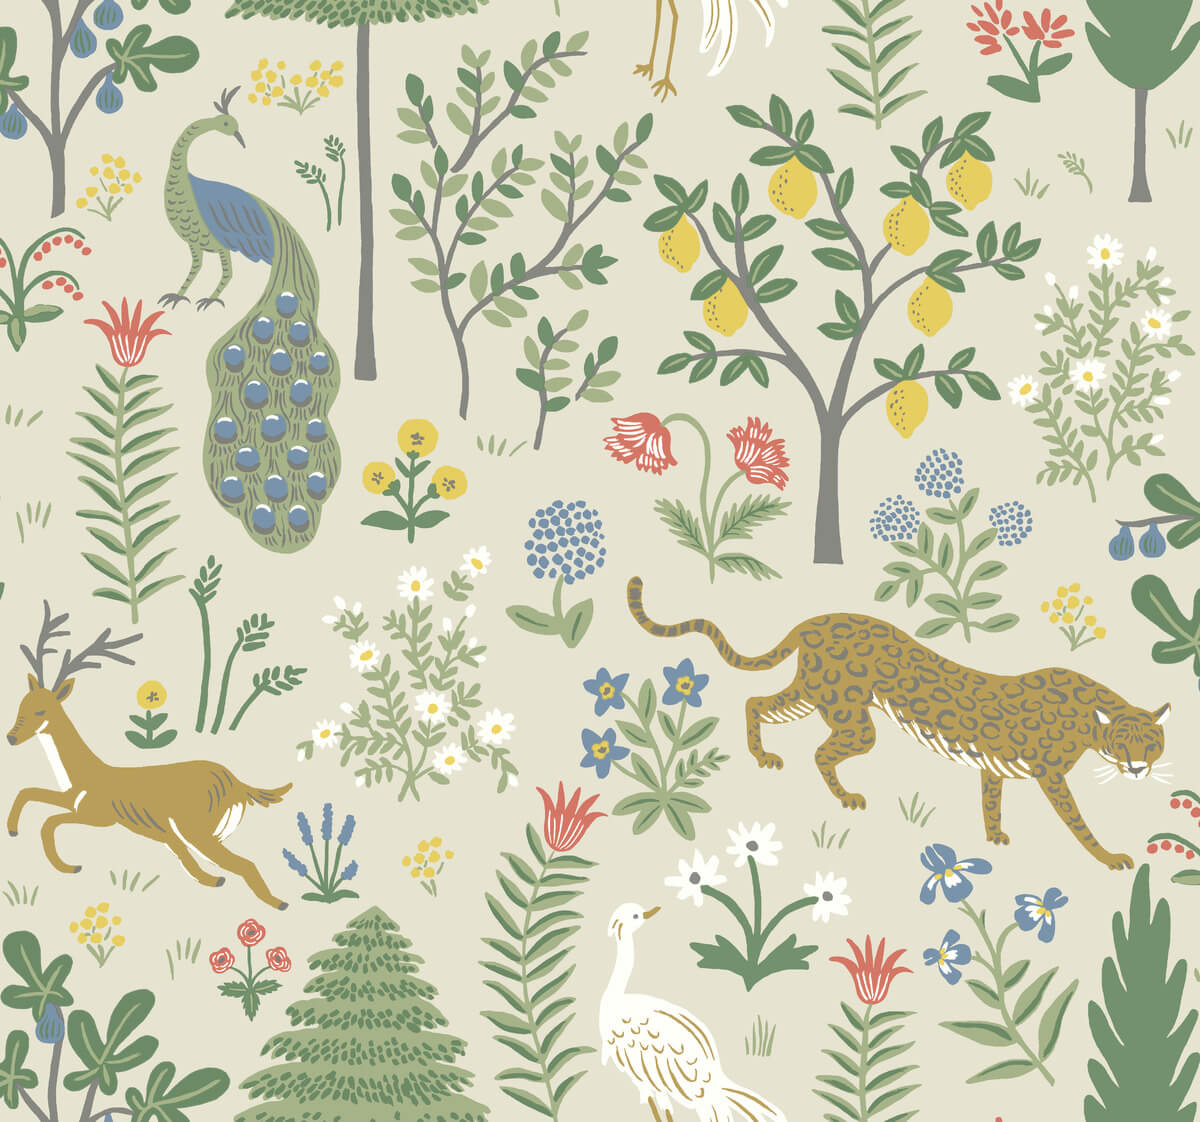 Rifle Paper Co. Second Edition Menagerie Wallpaper - SAMPLE